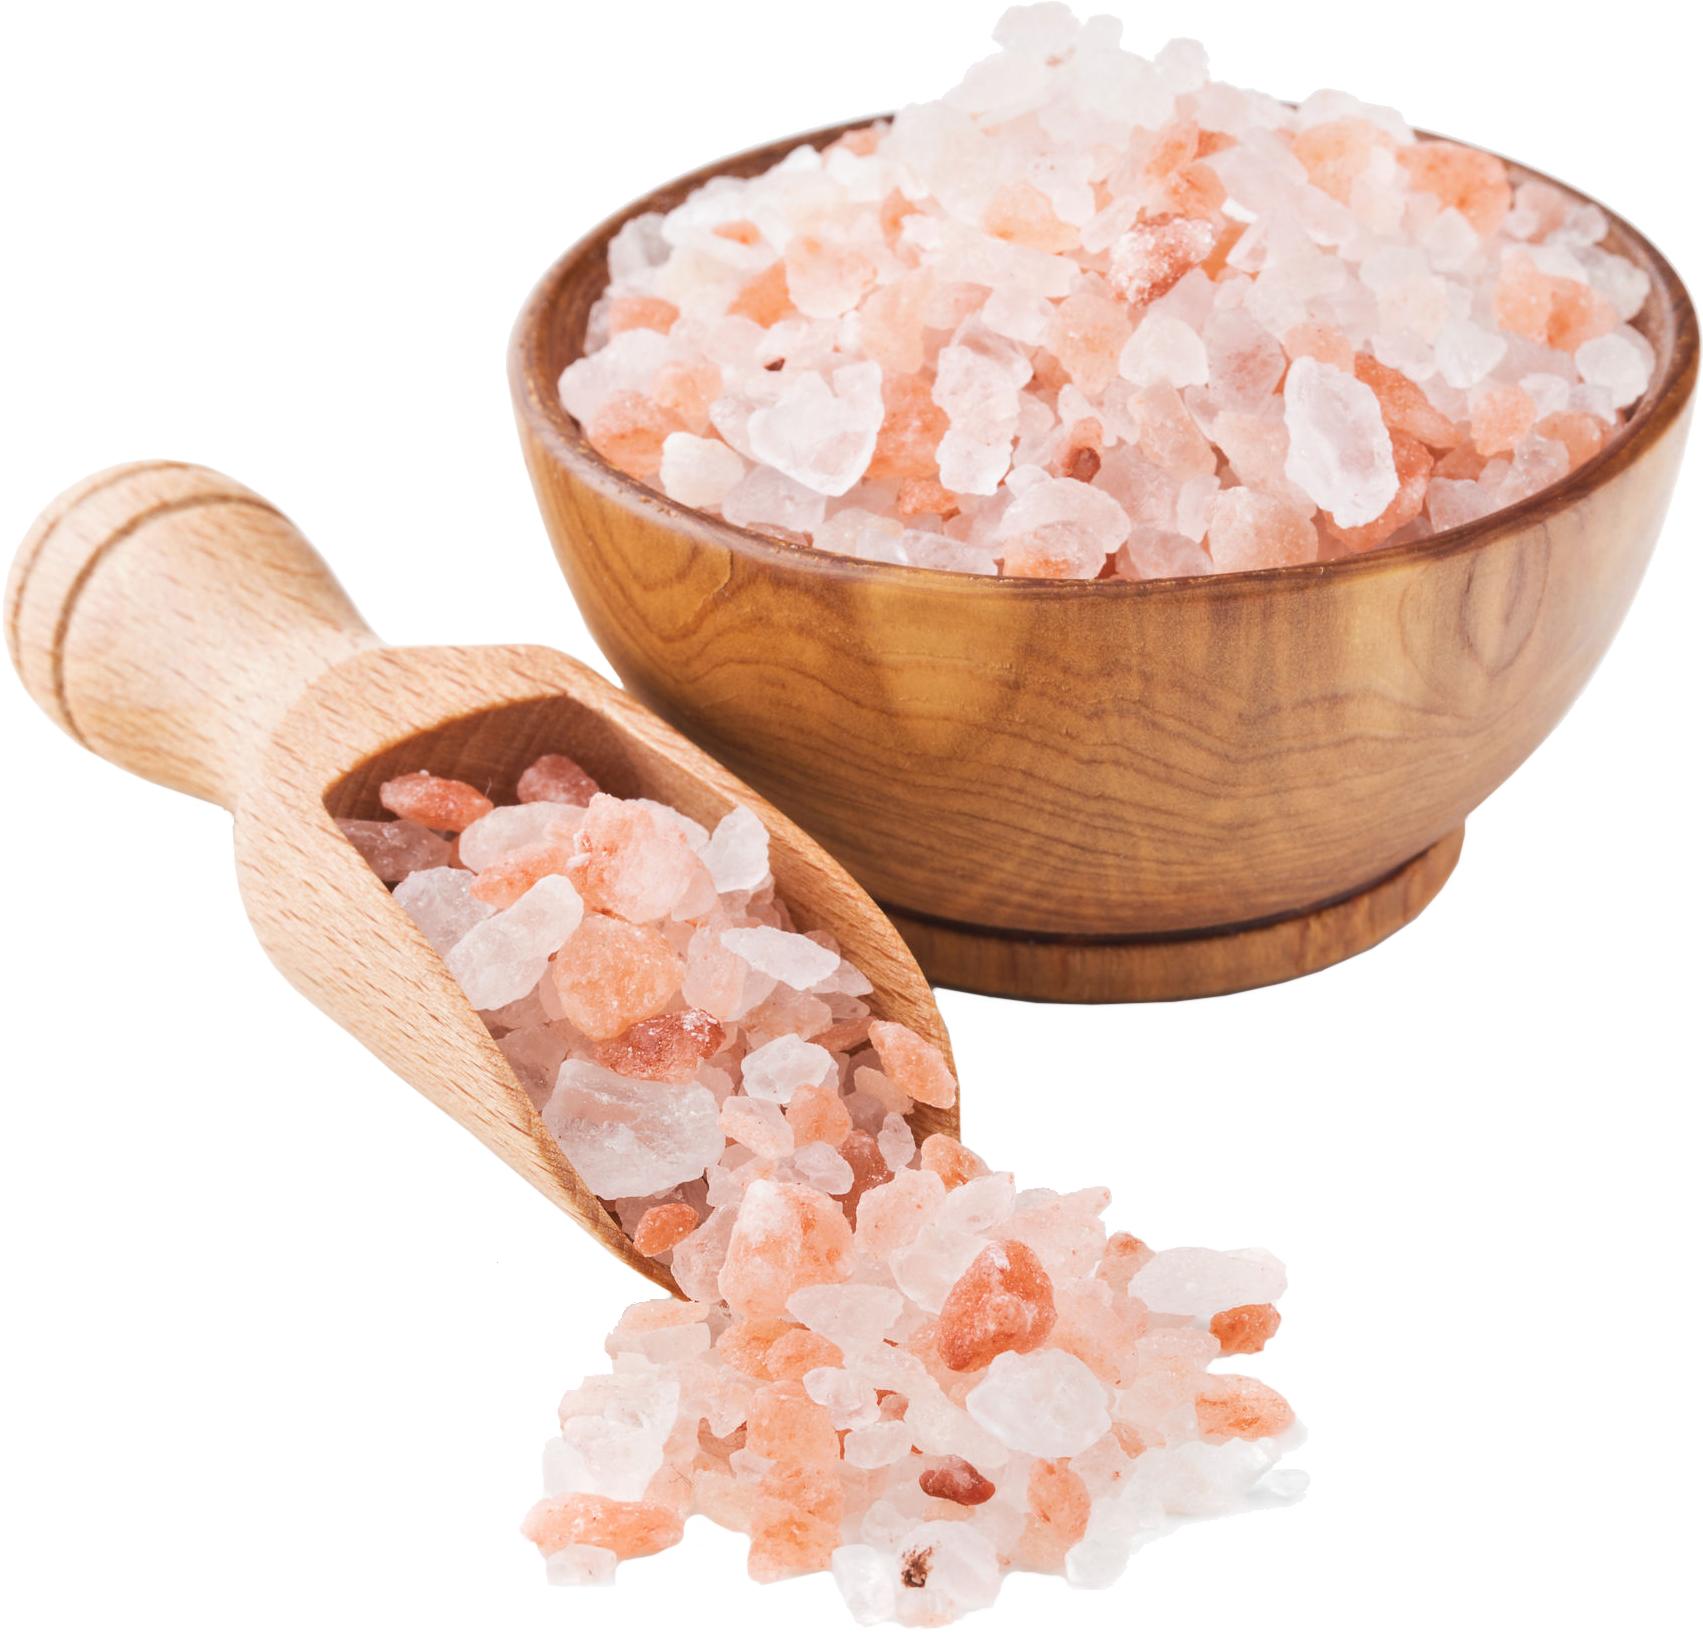 A Bowl And Bowl Of Salt